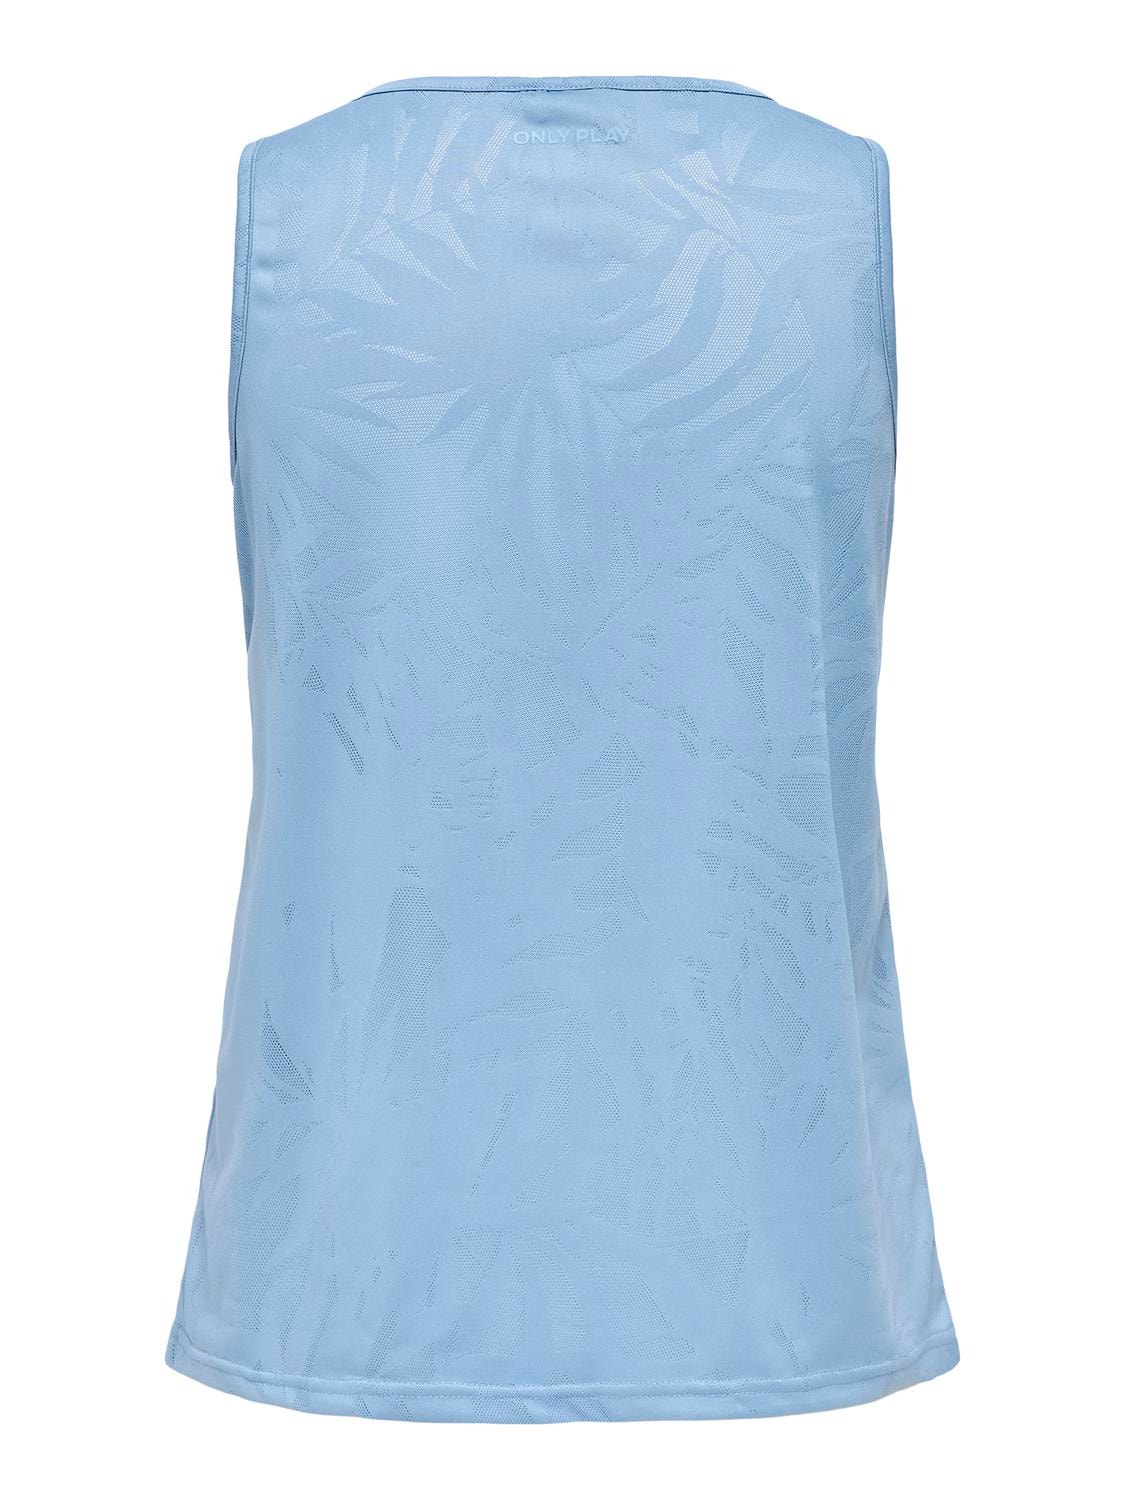 ONLY Training top with pattern -Blissful Blue - 15318941